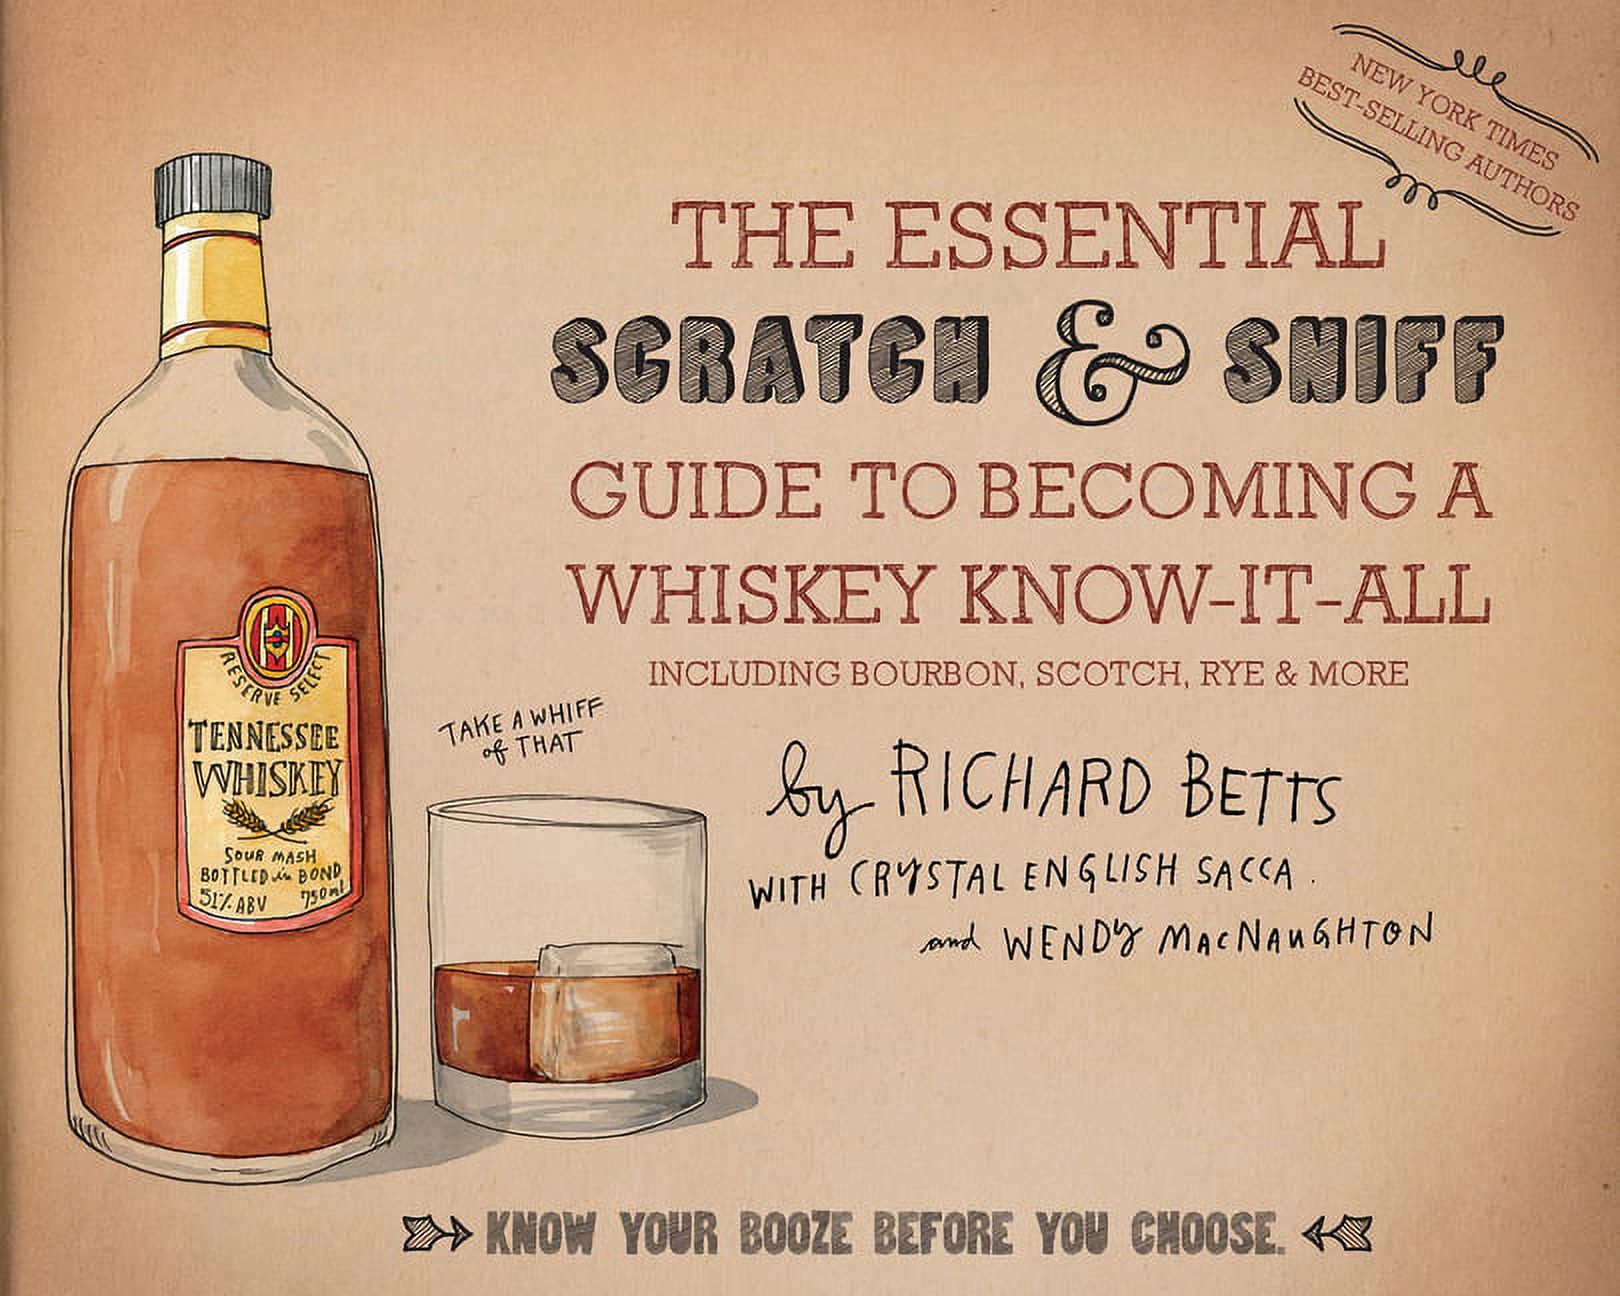 The Essential Scratch & Sniff Guide to Becoming a Whiskey Know-It-All (Hardcover) - image 1 of 1